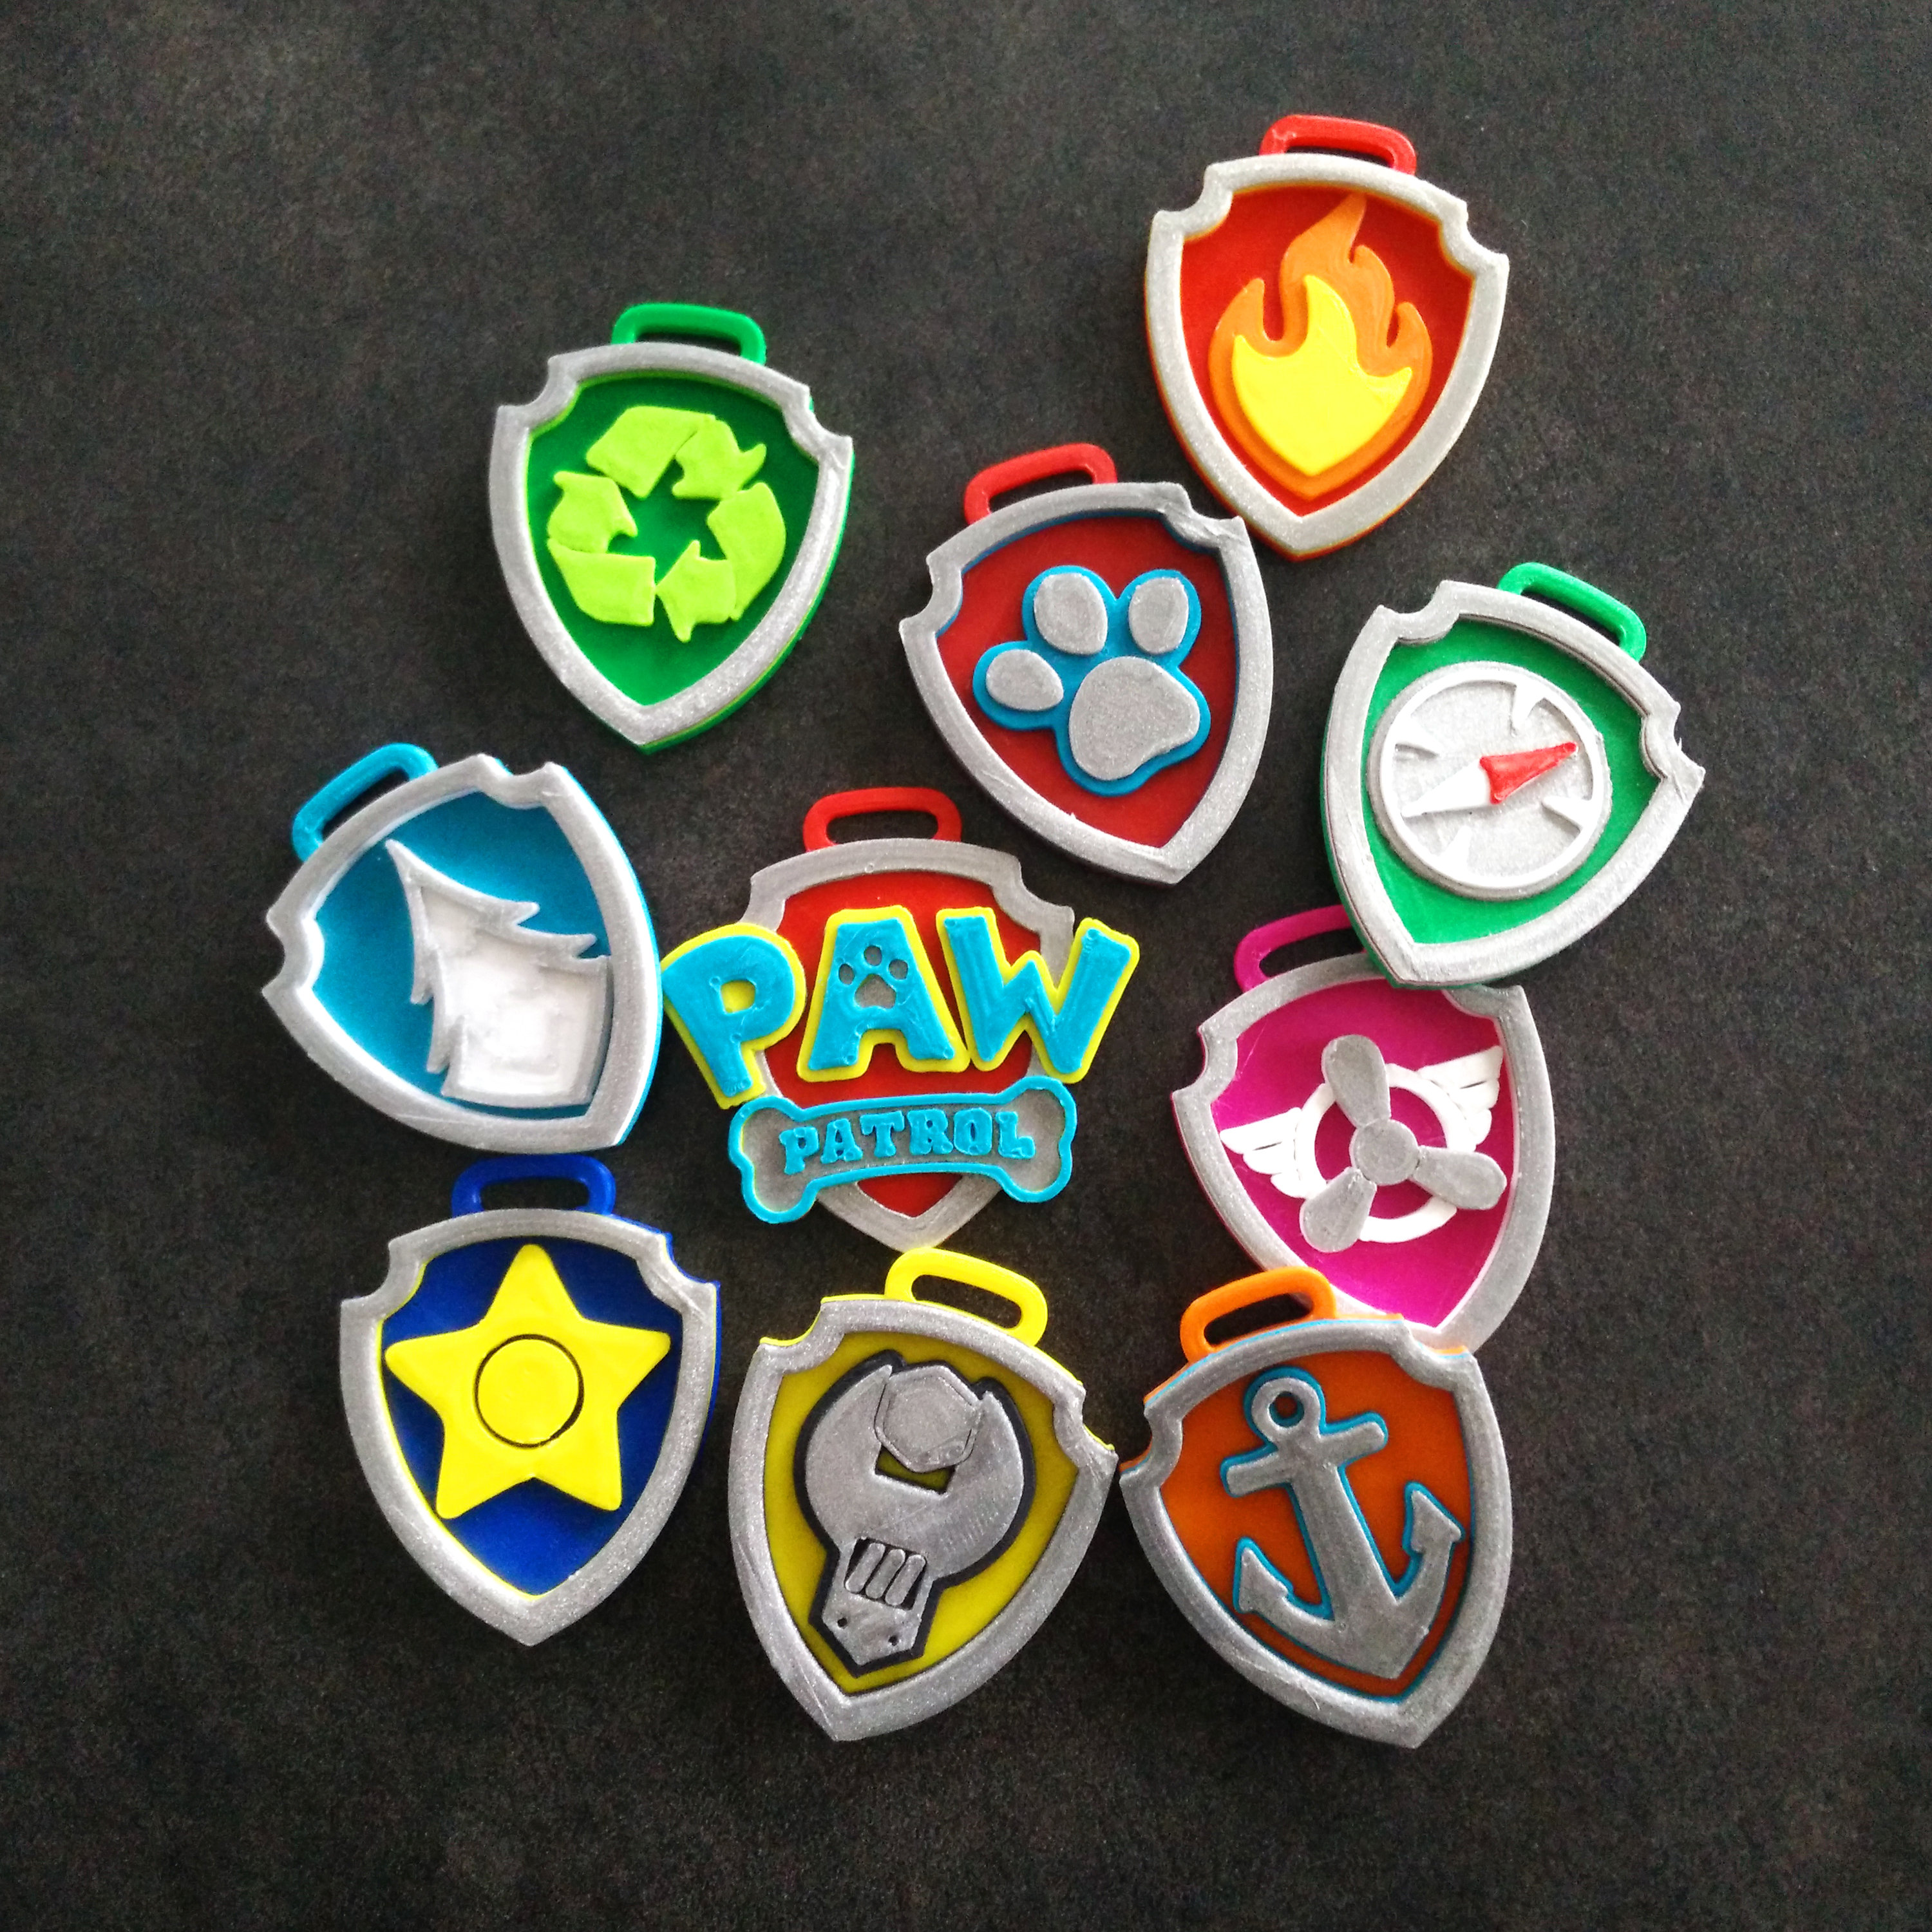 Paw Patrol Ryder Badge Perfect For Paw Patrol Costume Paw Etsy